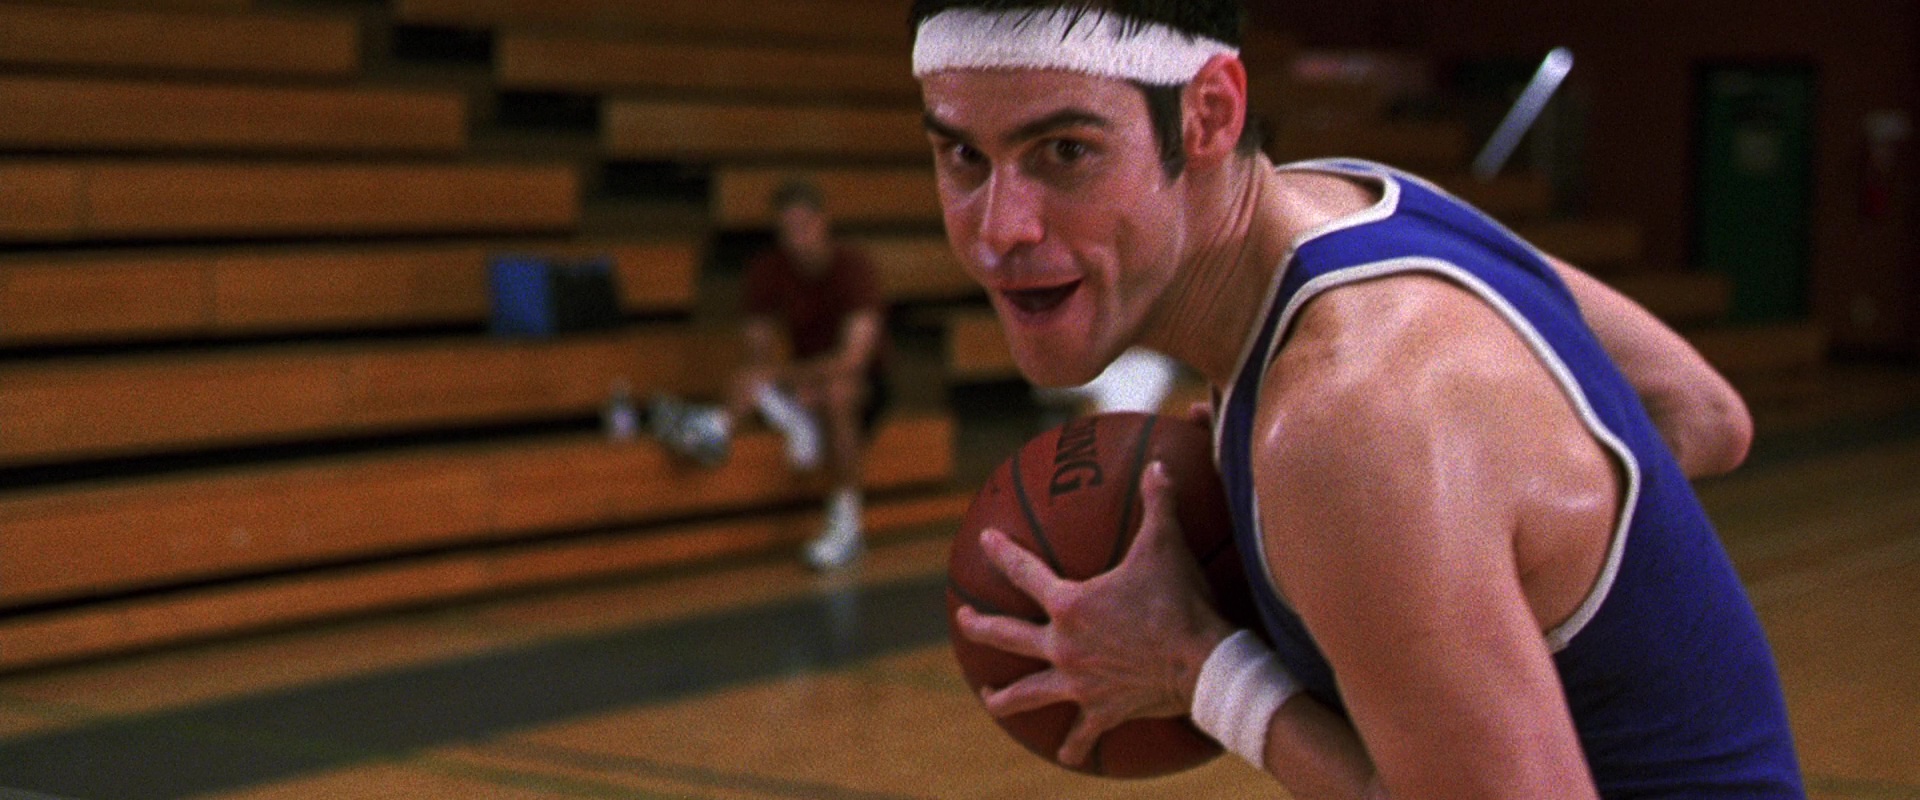 Spalding Basketball Used by Jim Carrey in The Cable Guy (1996) .